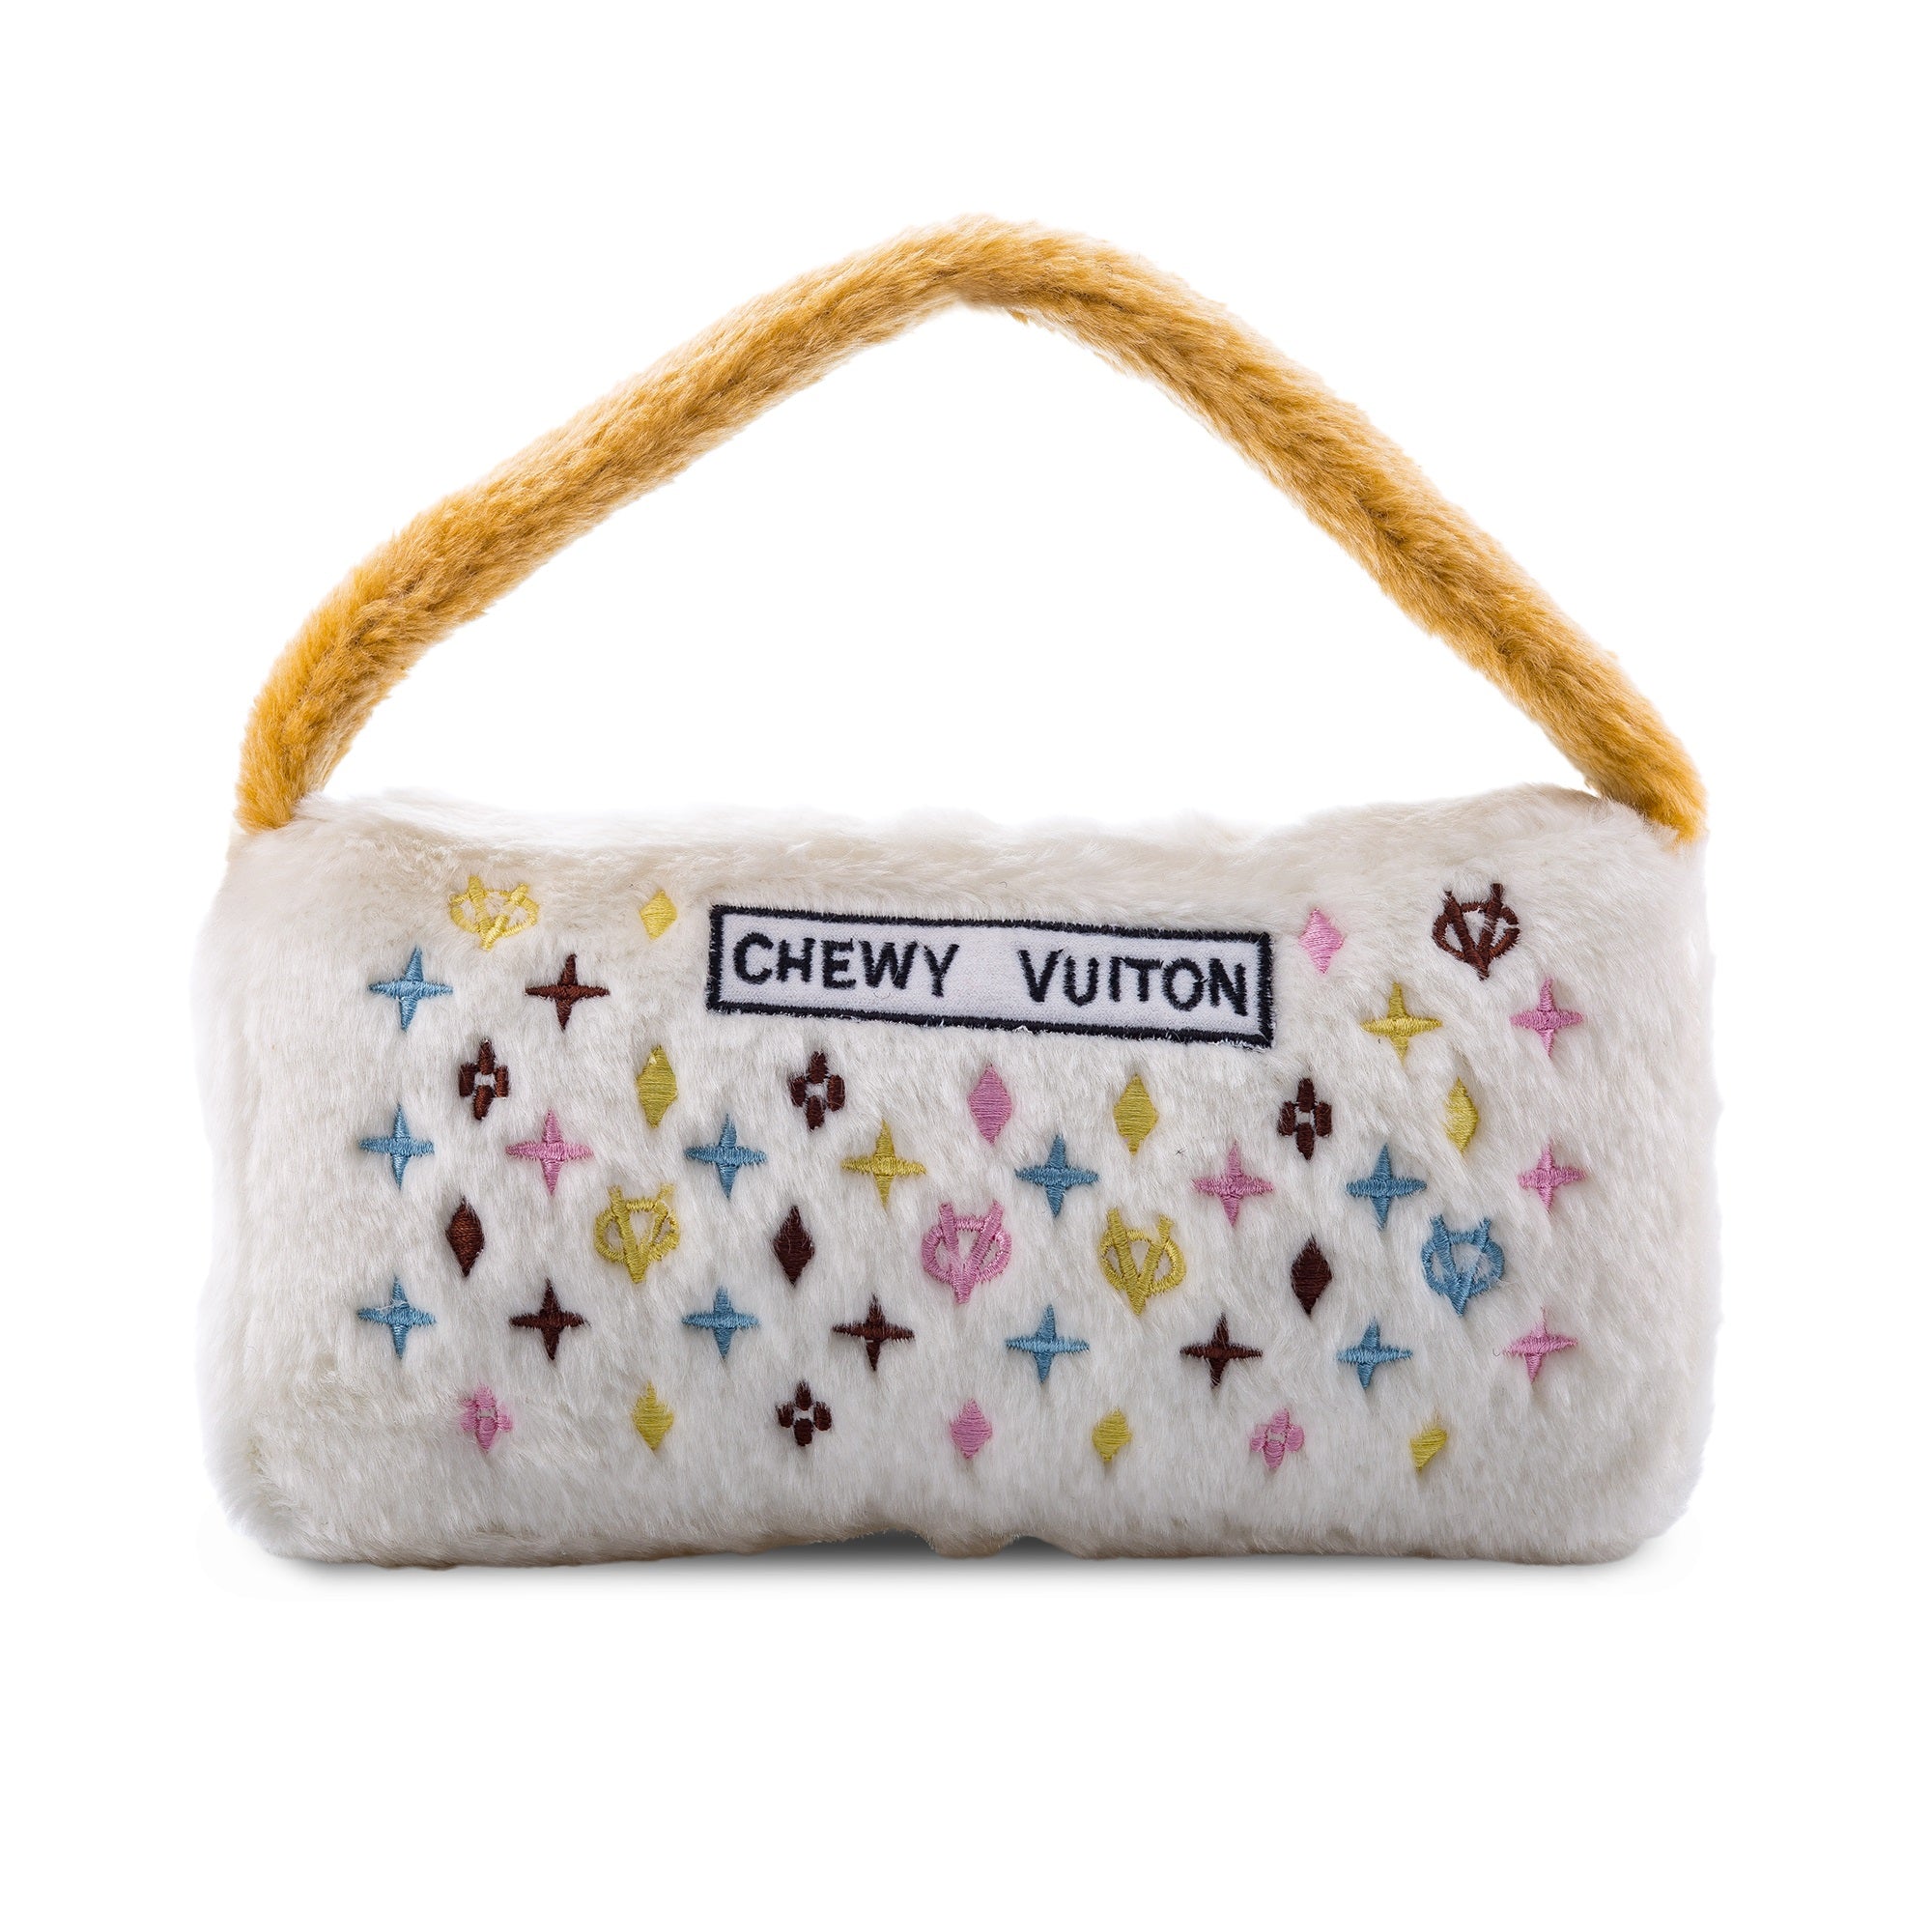 Chewy Vuiton Purse, Chewy Vuiton Handbag Toy, Purse Dog Toy, Chewy Vuiton,  Designer Dog Toy, Haute Diggity Dog Toy, Handbag Dog Toy - Tails in the City